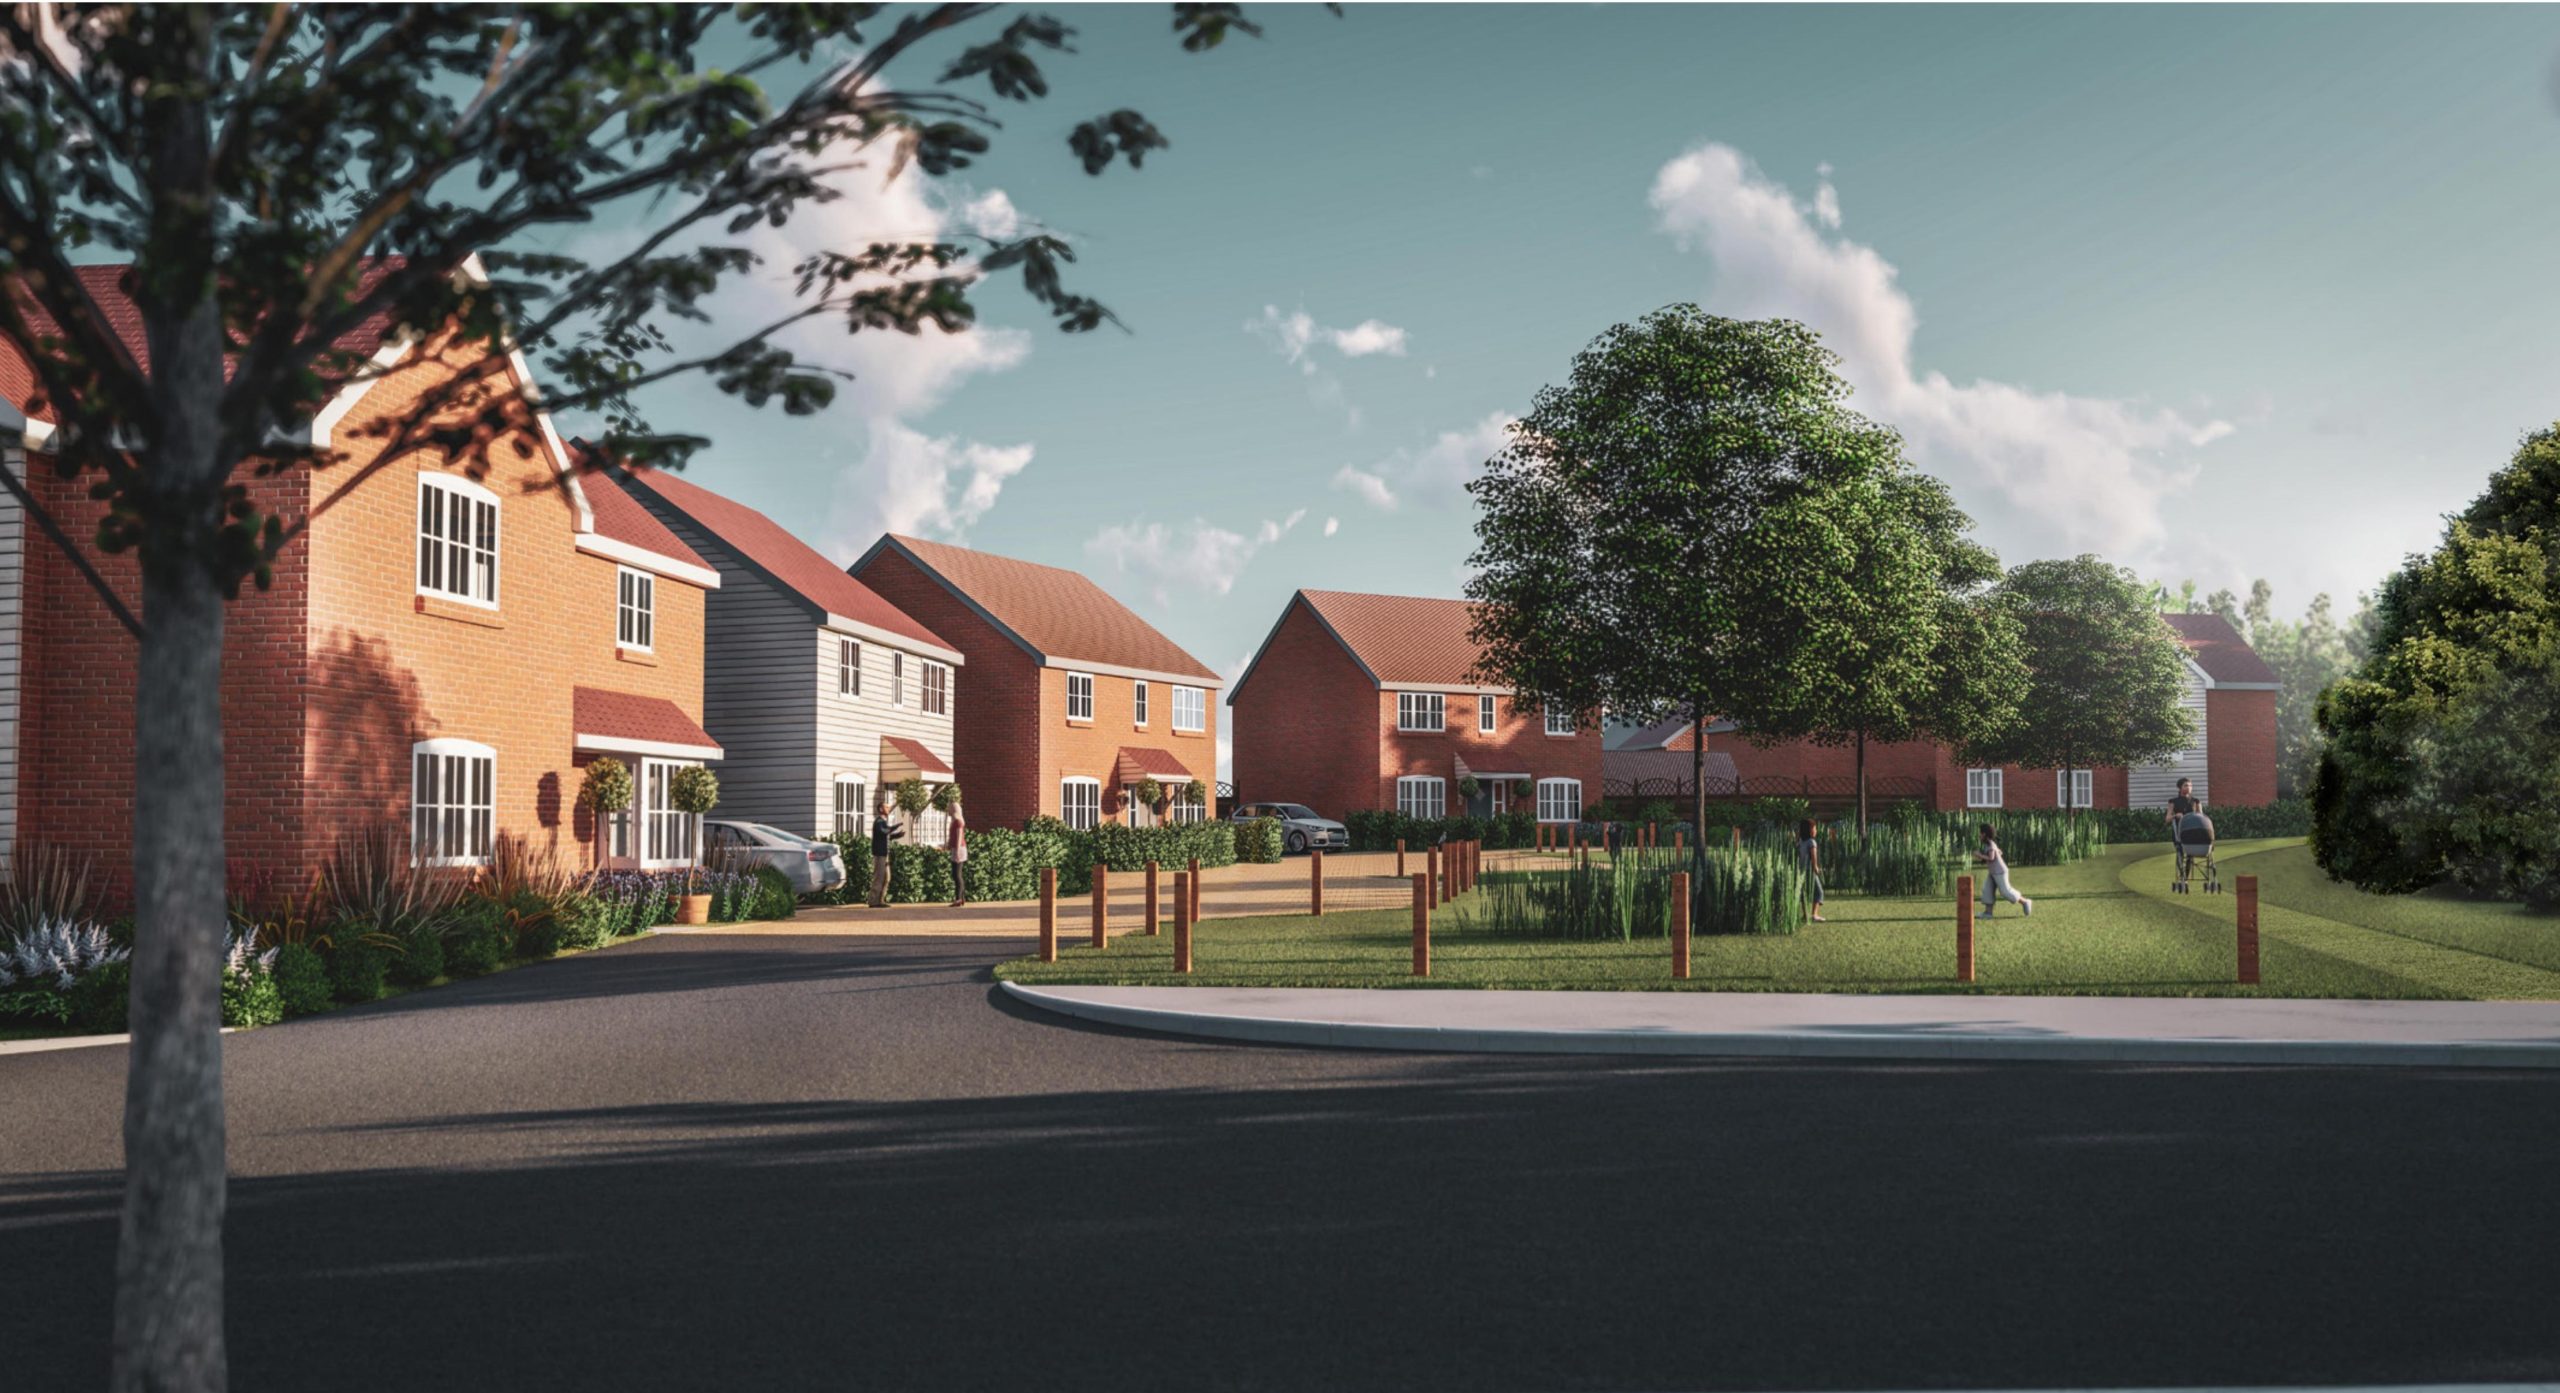 First Homes at New Development in Saffron Walden Available